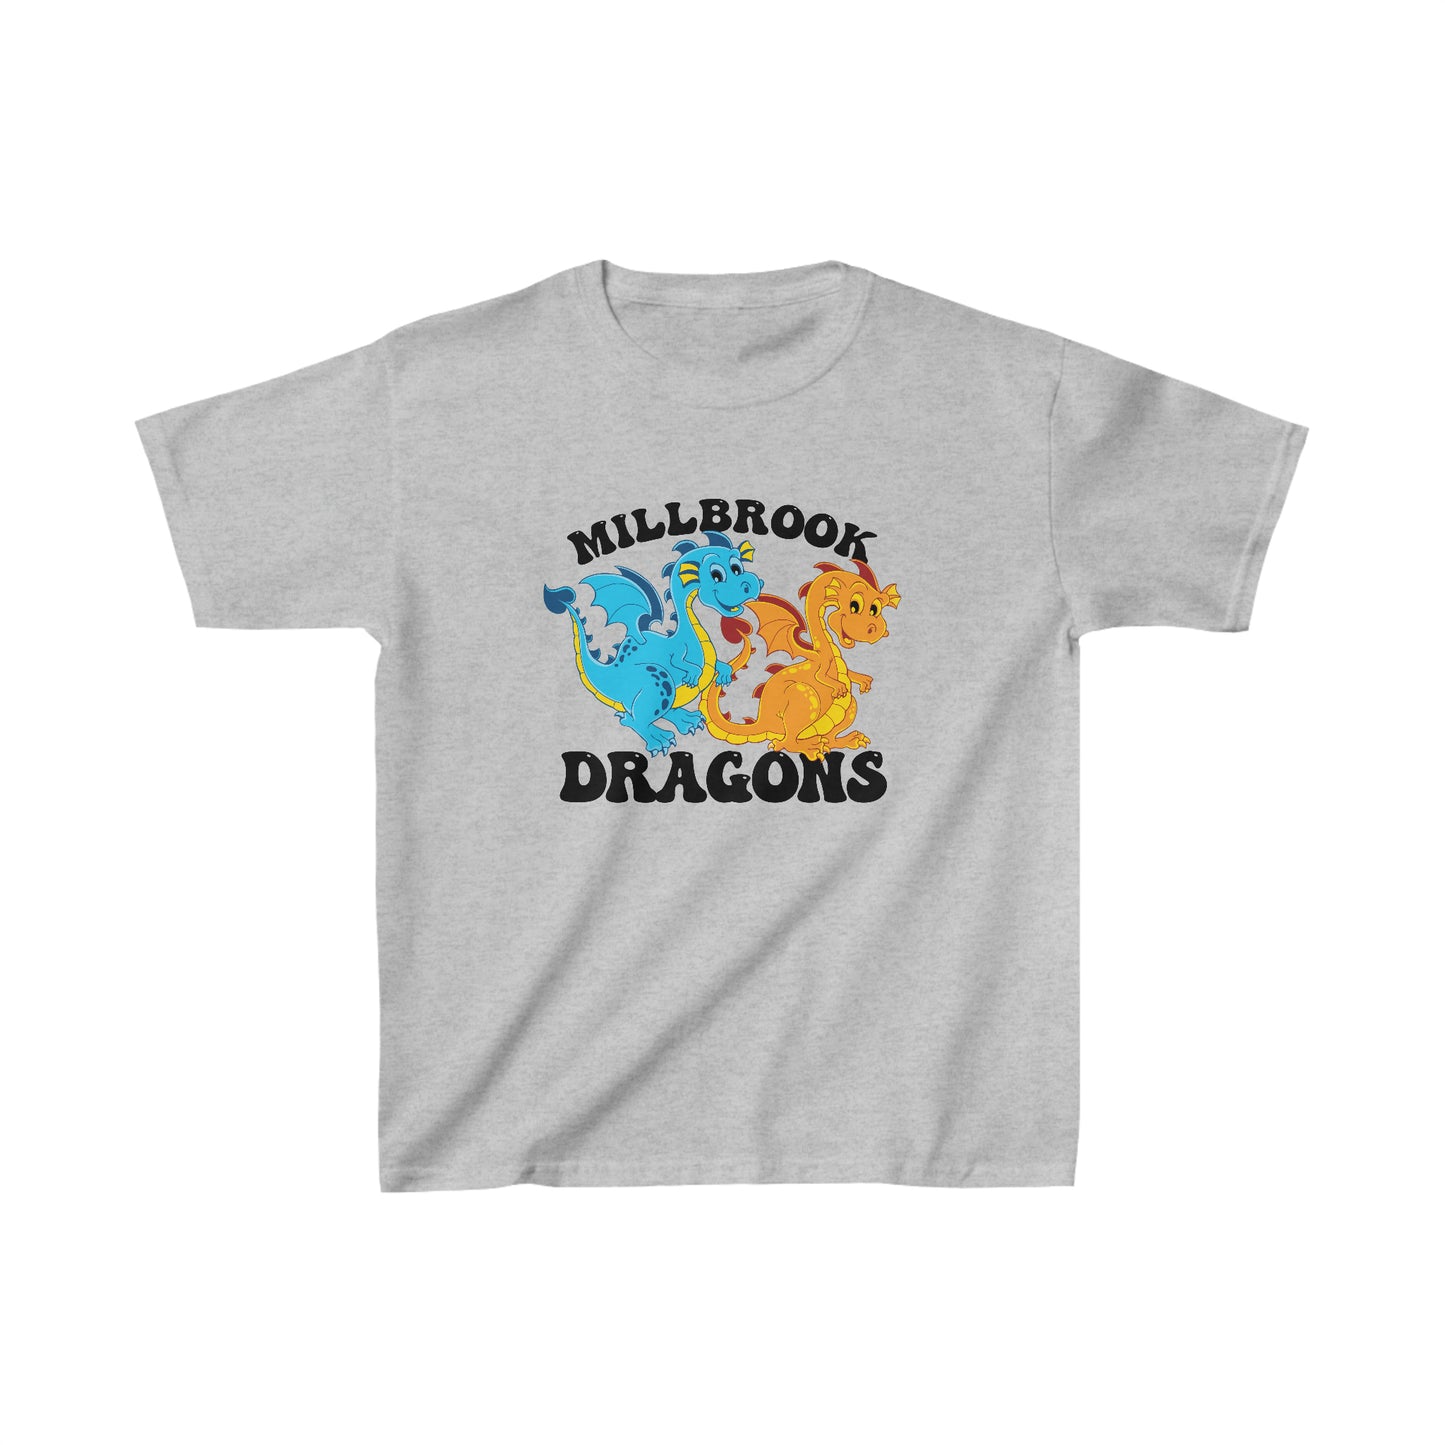 Millbrook Dragons Tee - Youth